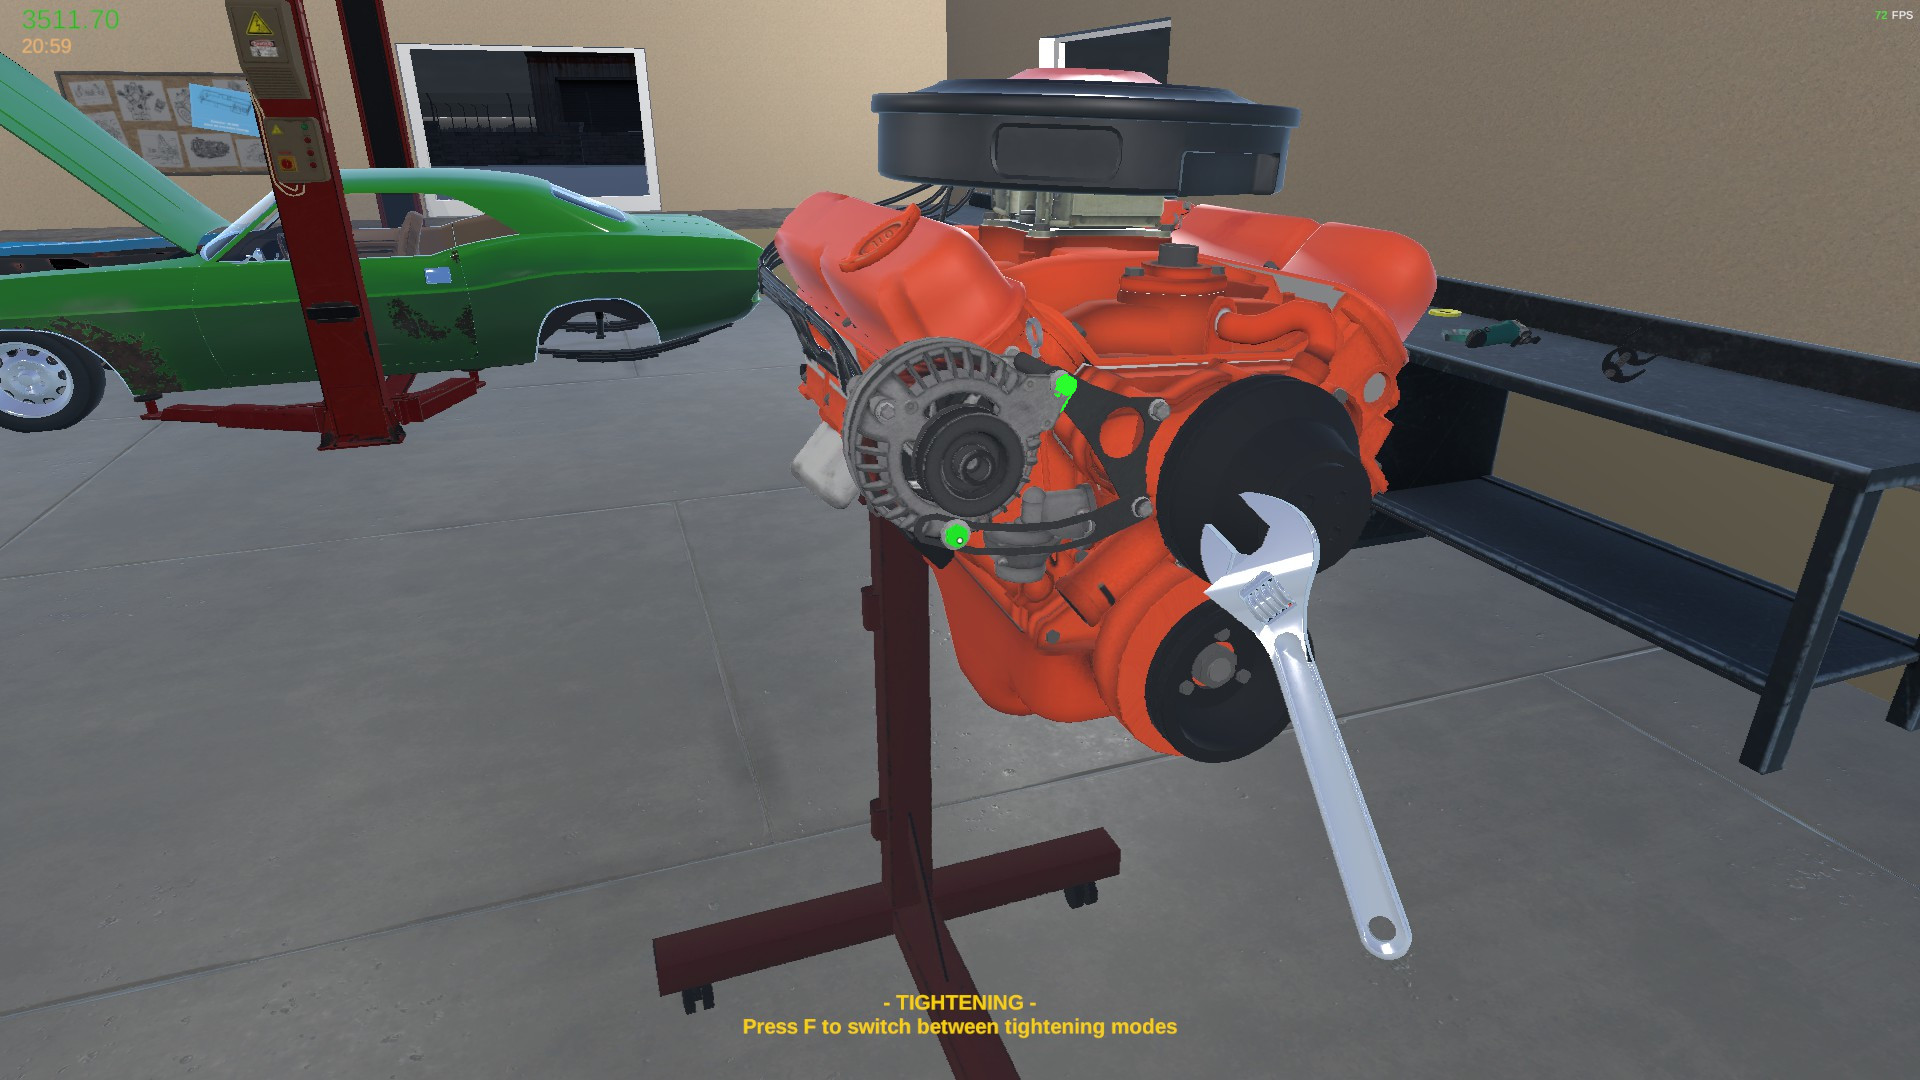 My Garage How to build a V8 engine guide - 4. Accessories - A0F2EB8